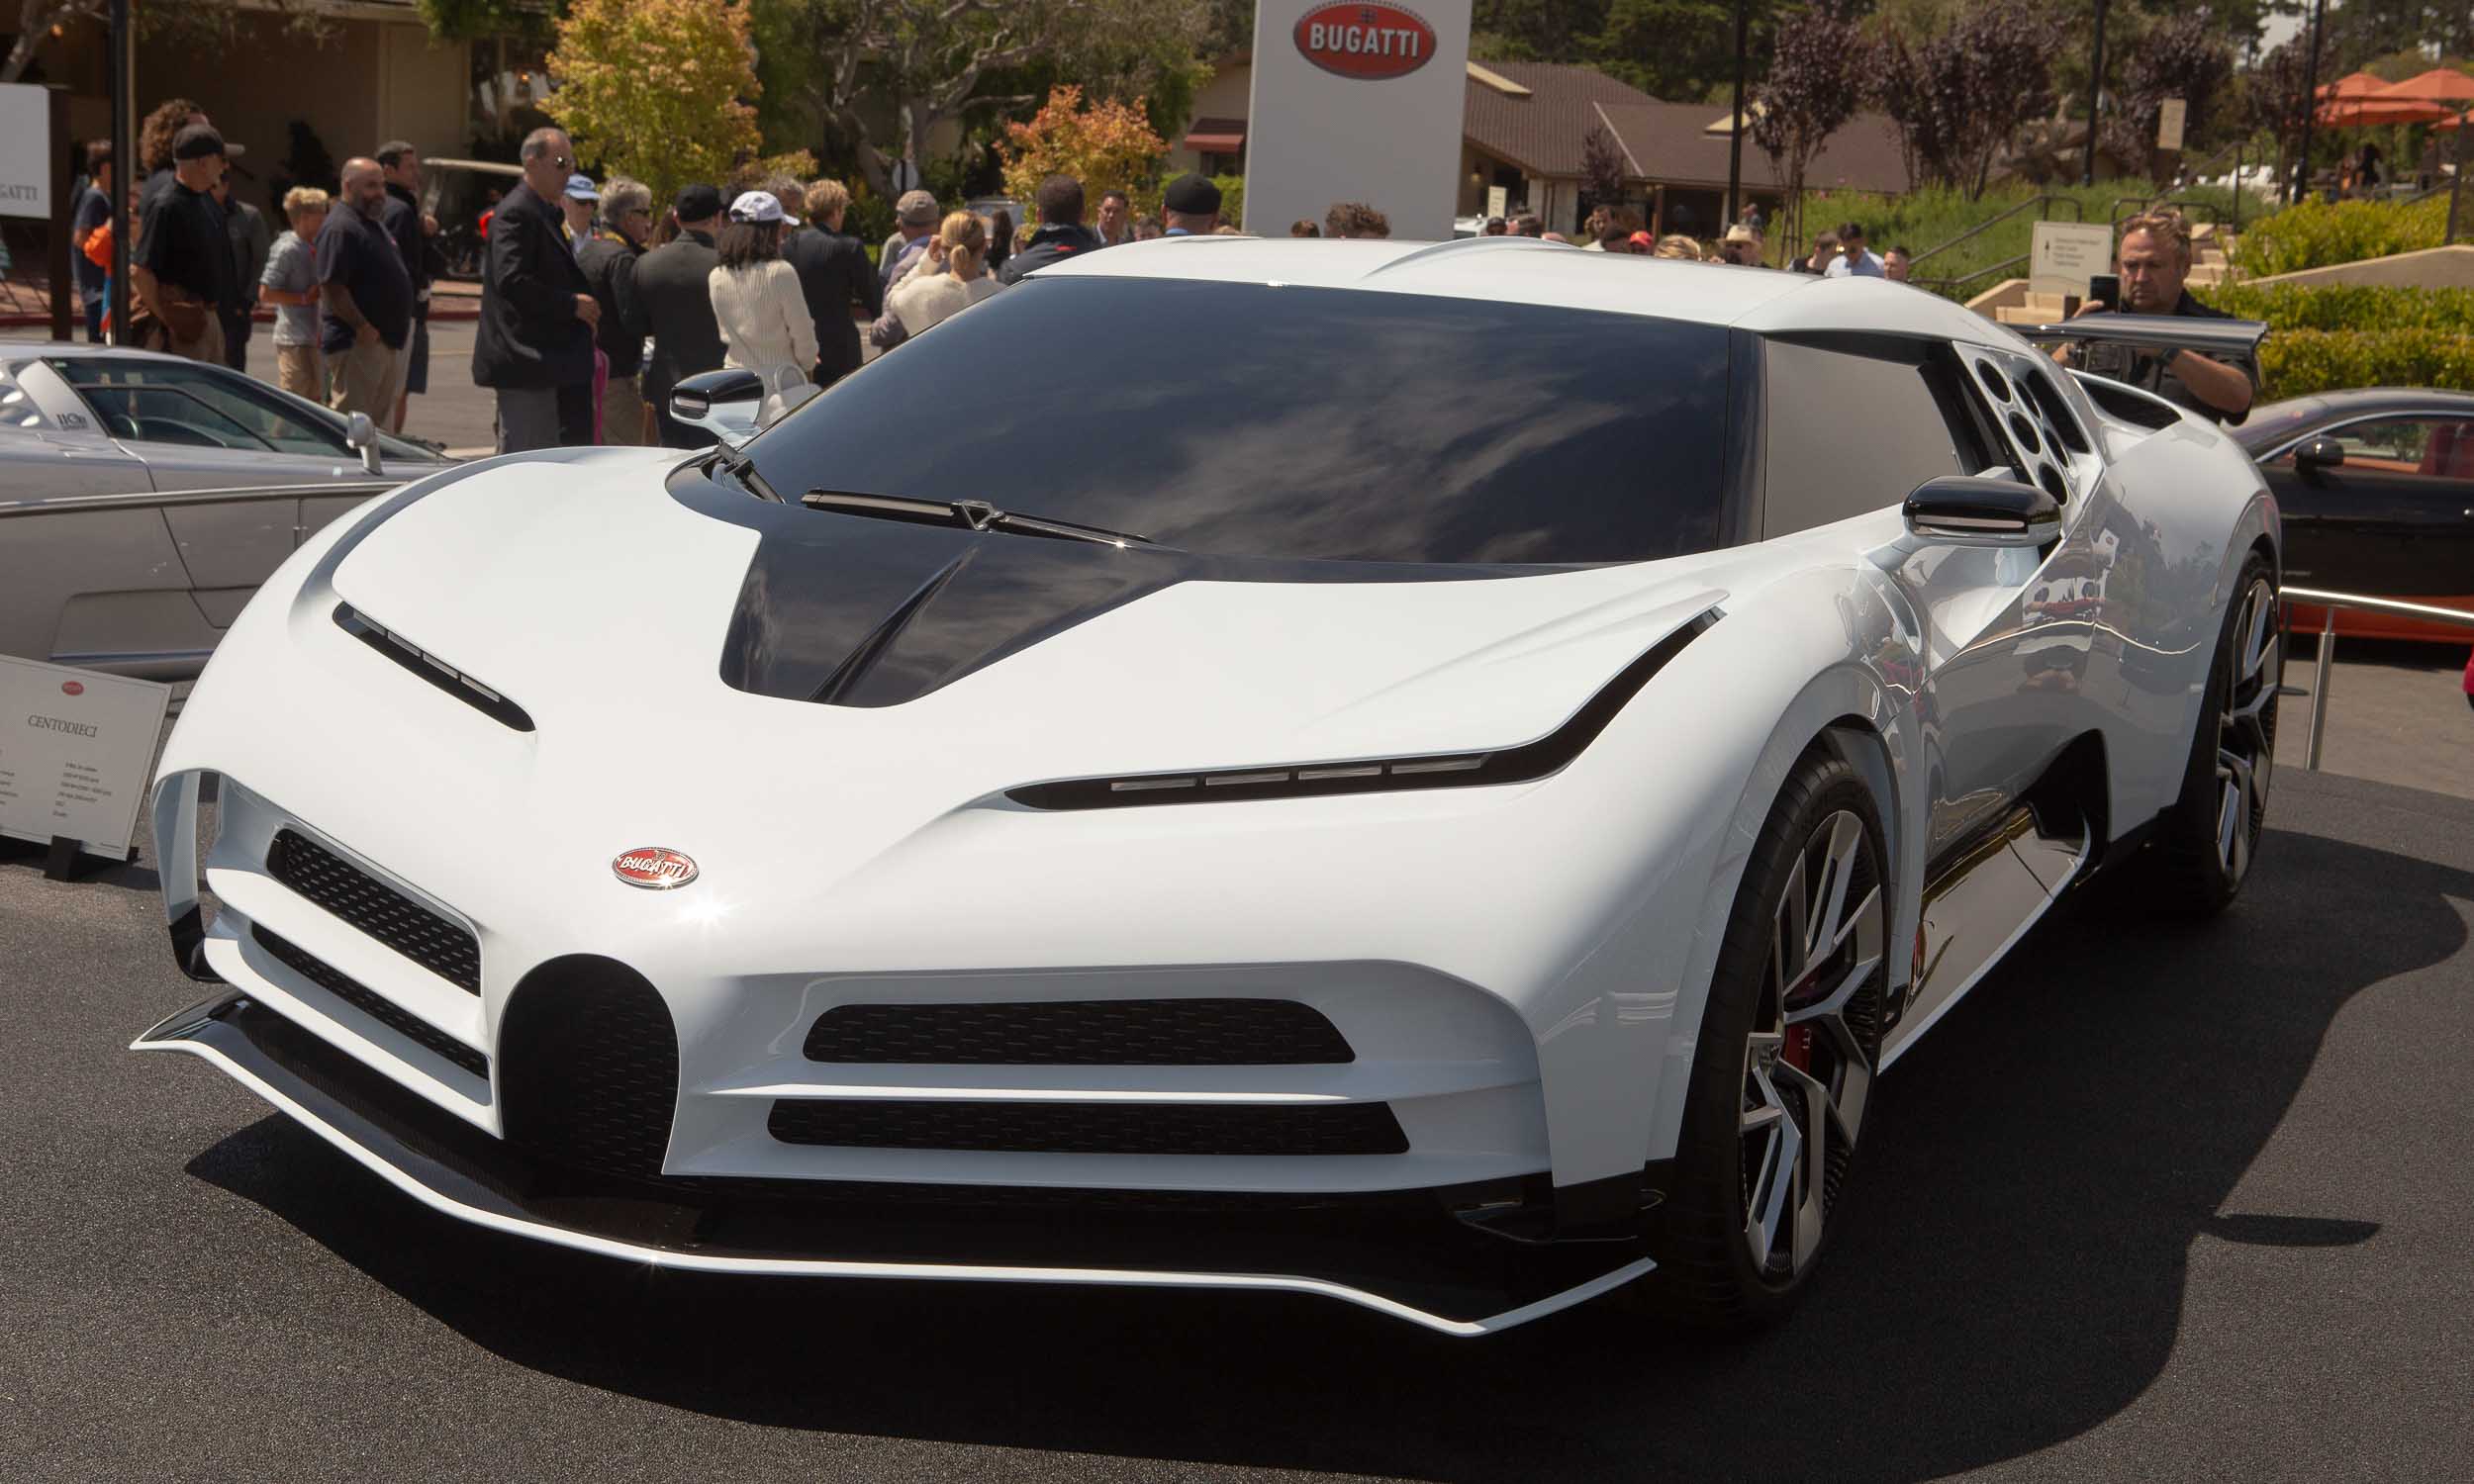 <p>          Total Production: 10 vehicles<br> Price: €8 million (US$9.8 million)<br> This Few Off Bugatti was introduced at the 2019 Pebble Beach Concours d’Elegance. Celebrating the brand’s 110th anniversary, Bugatti unveiled the exclusive Centodieci — a car designed as a tribute to a previous Bugatti supercar, the EB110. While the Centodieci is based on the Chiron, designers, and engineers had significant hurdles to overcome beyond simply swapping out Chiron body panels to create the Centodieci. The Chiron’s complex design incorporates bodywork as an integral part of the car’s aerodynamics and cooling, as well as its high speed.         </p>